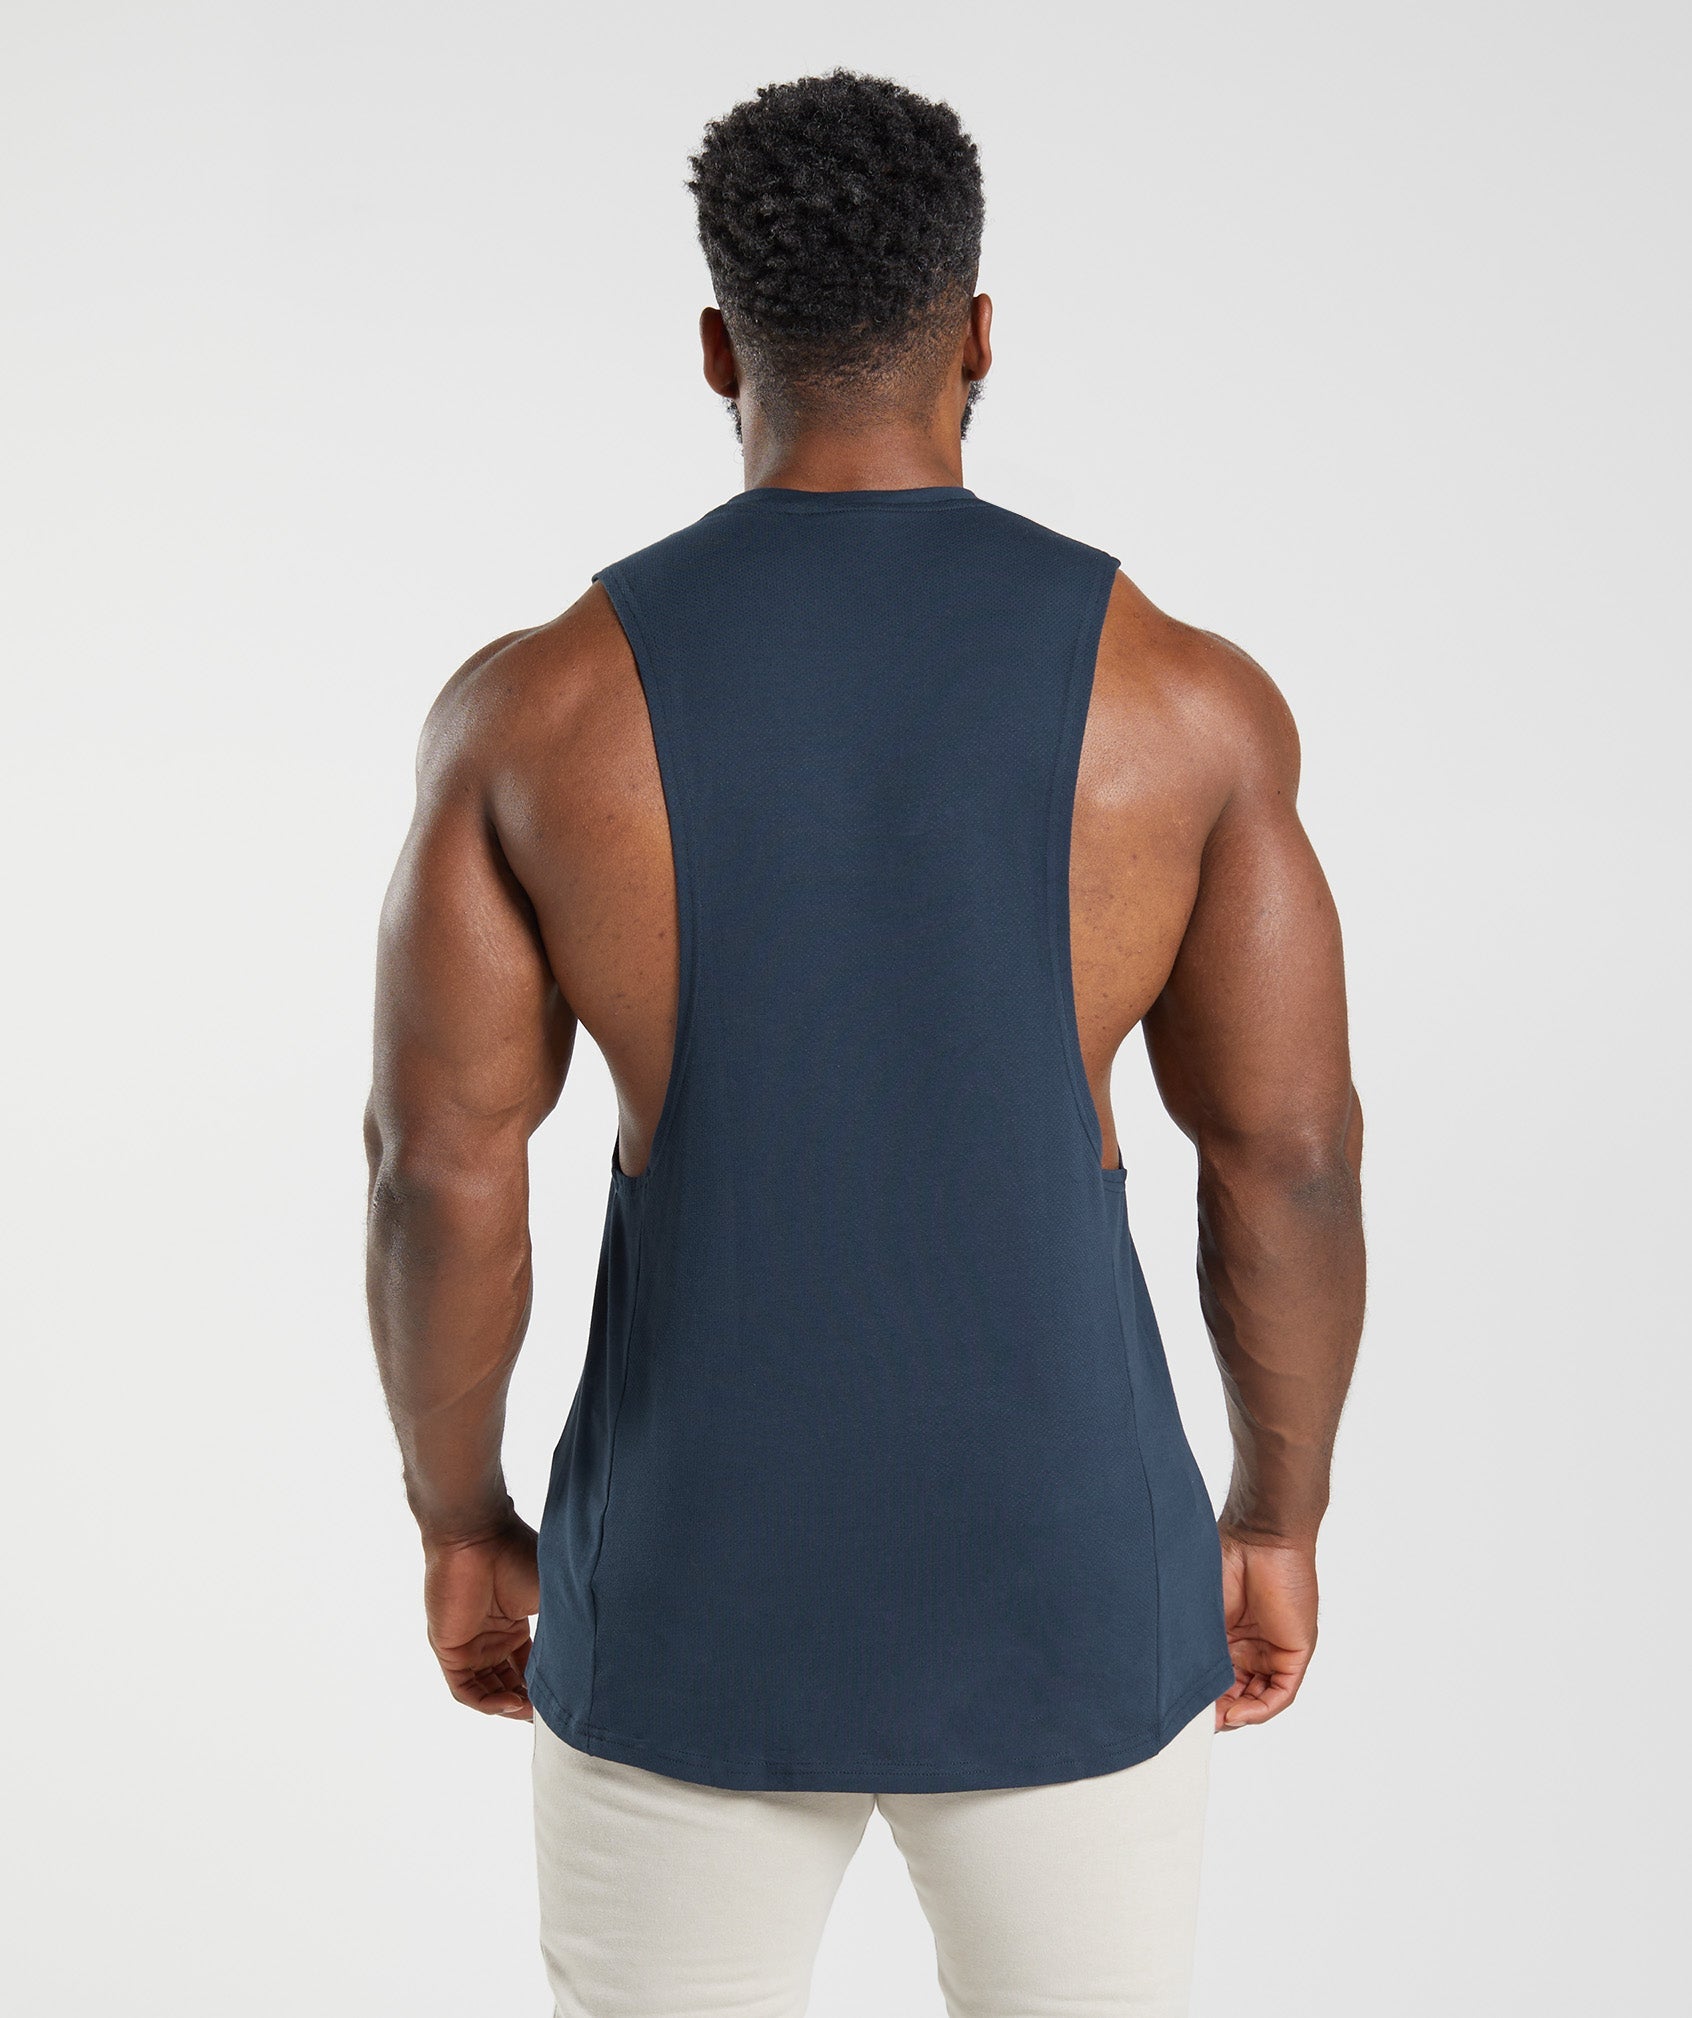 Men Sleeveless Tshirt Round Neck Workout Tank Top Lightweight Athletic  Muscle Tee Performance Stretch Tank Top